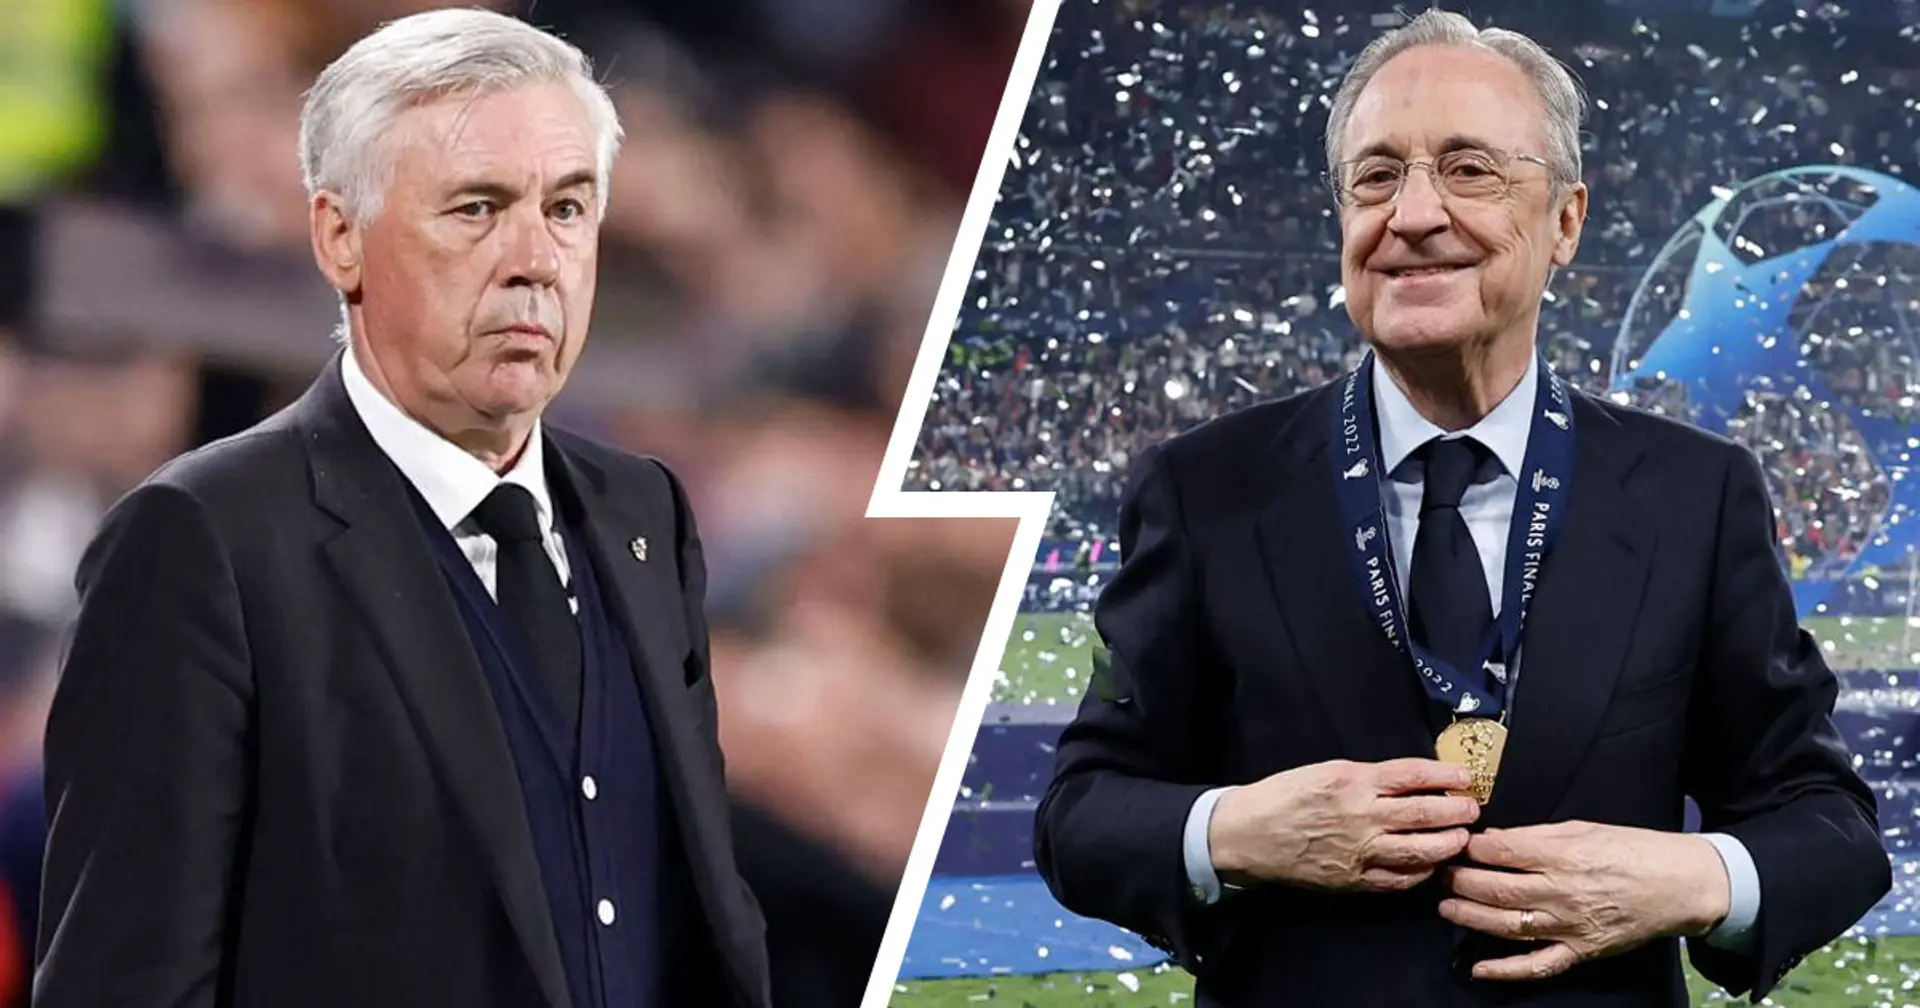 Ancelotti asks Perez to sign new striker in January - two potential options named (reliability: 4 stars)